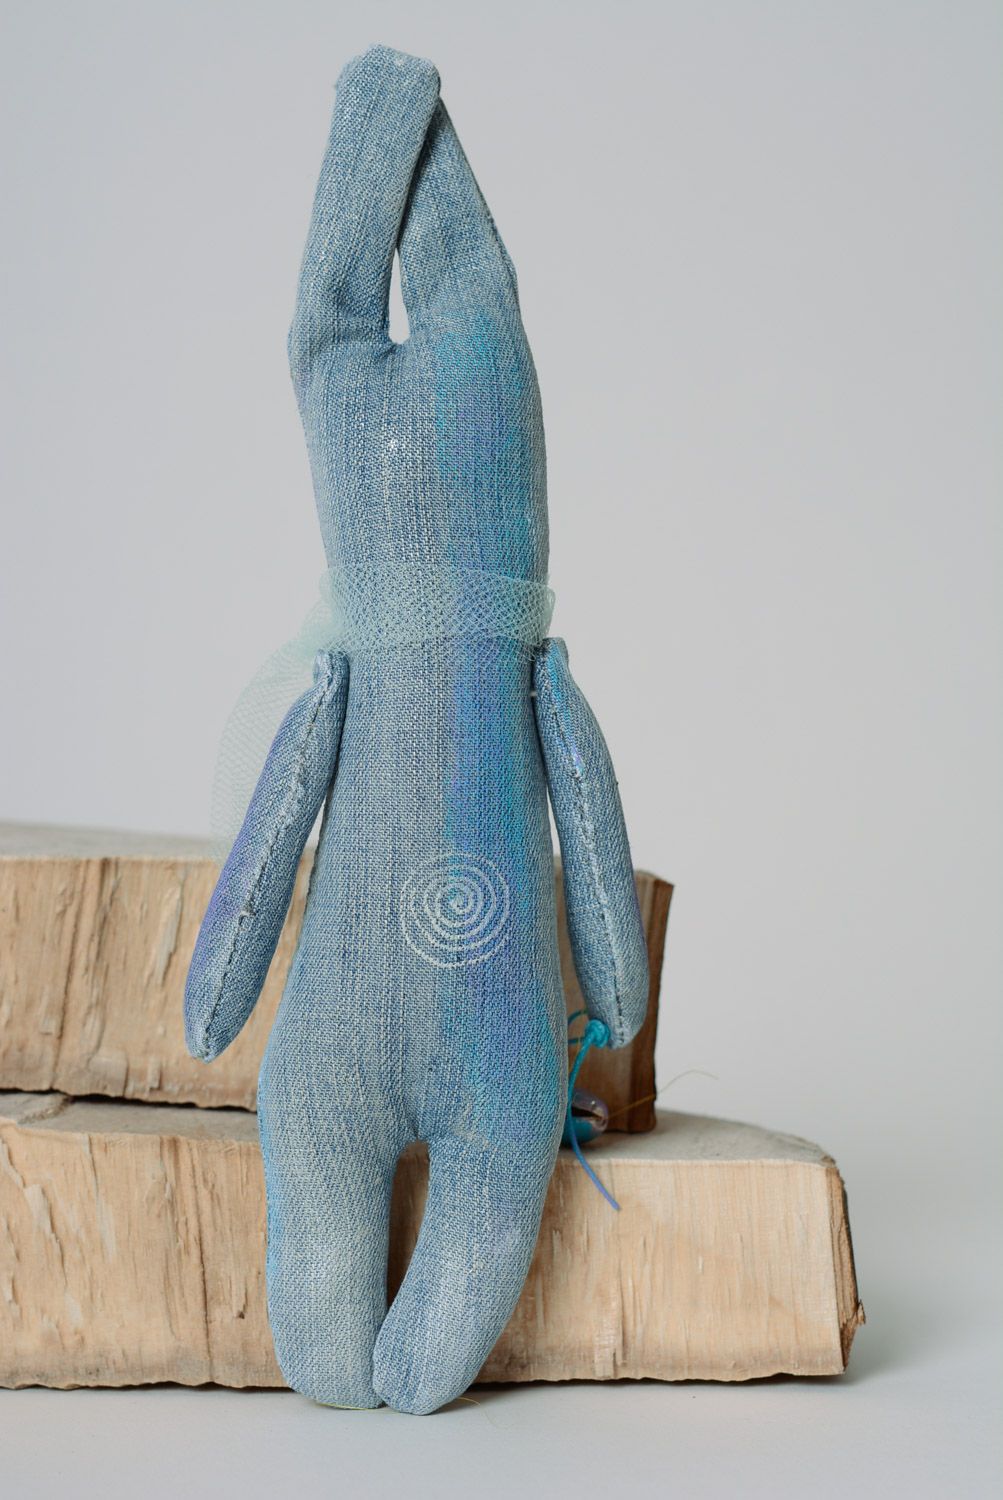 Handmade designer soft toy sewn of denim fabric and painted with acrylics photo 5